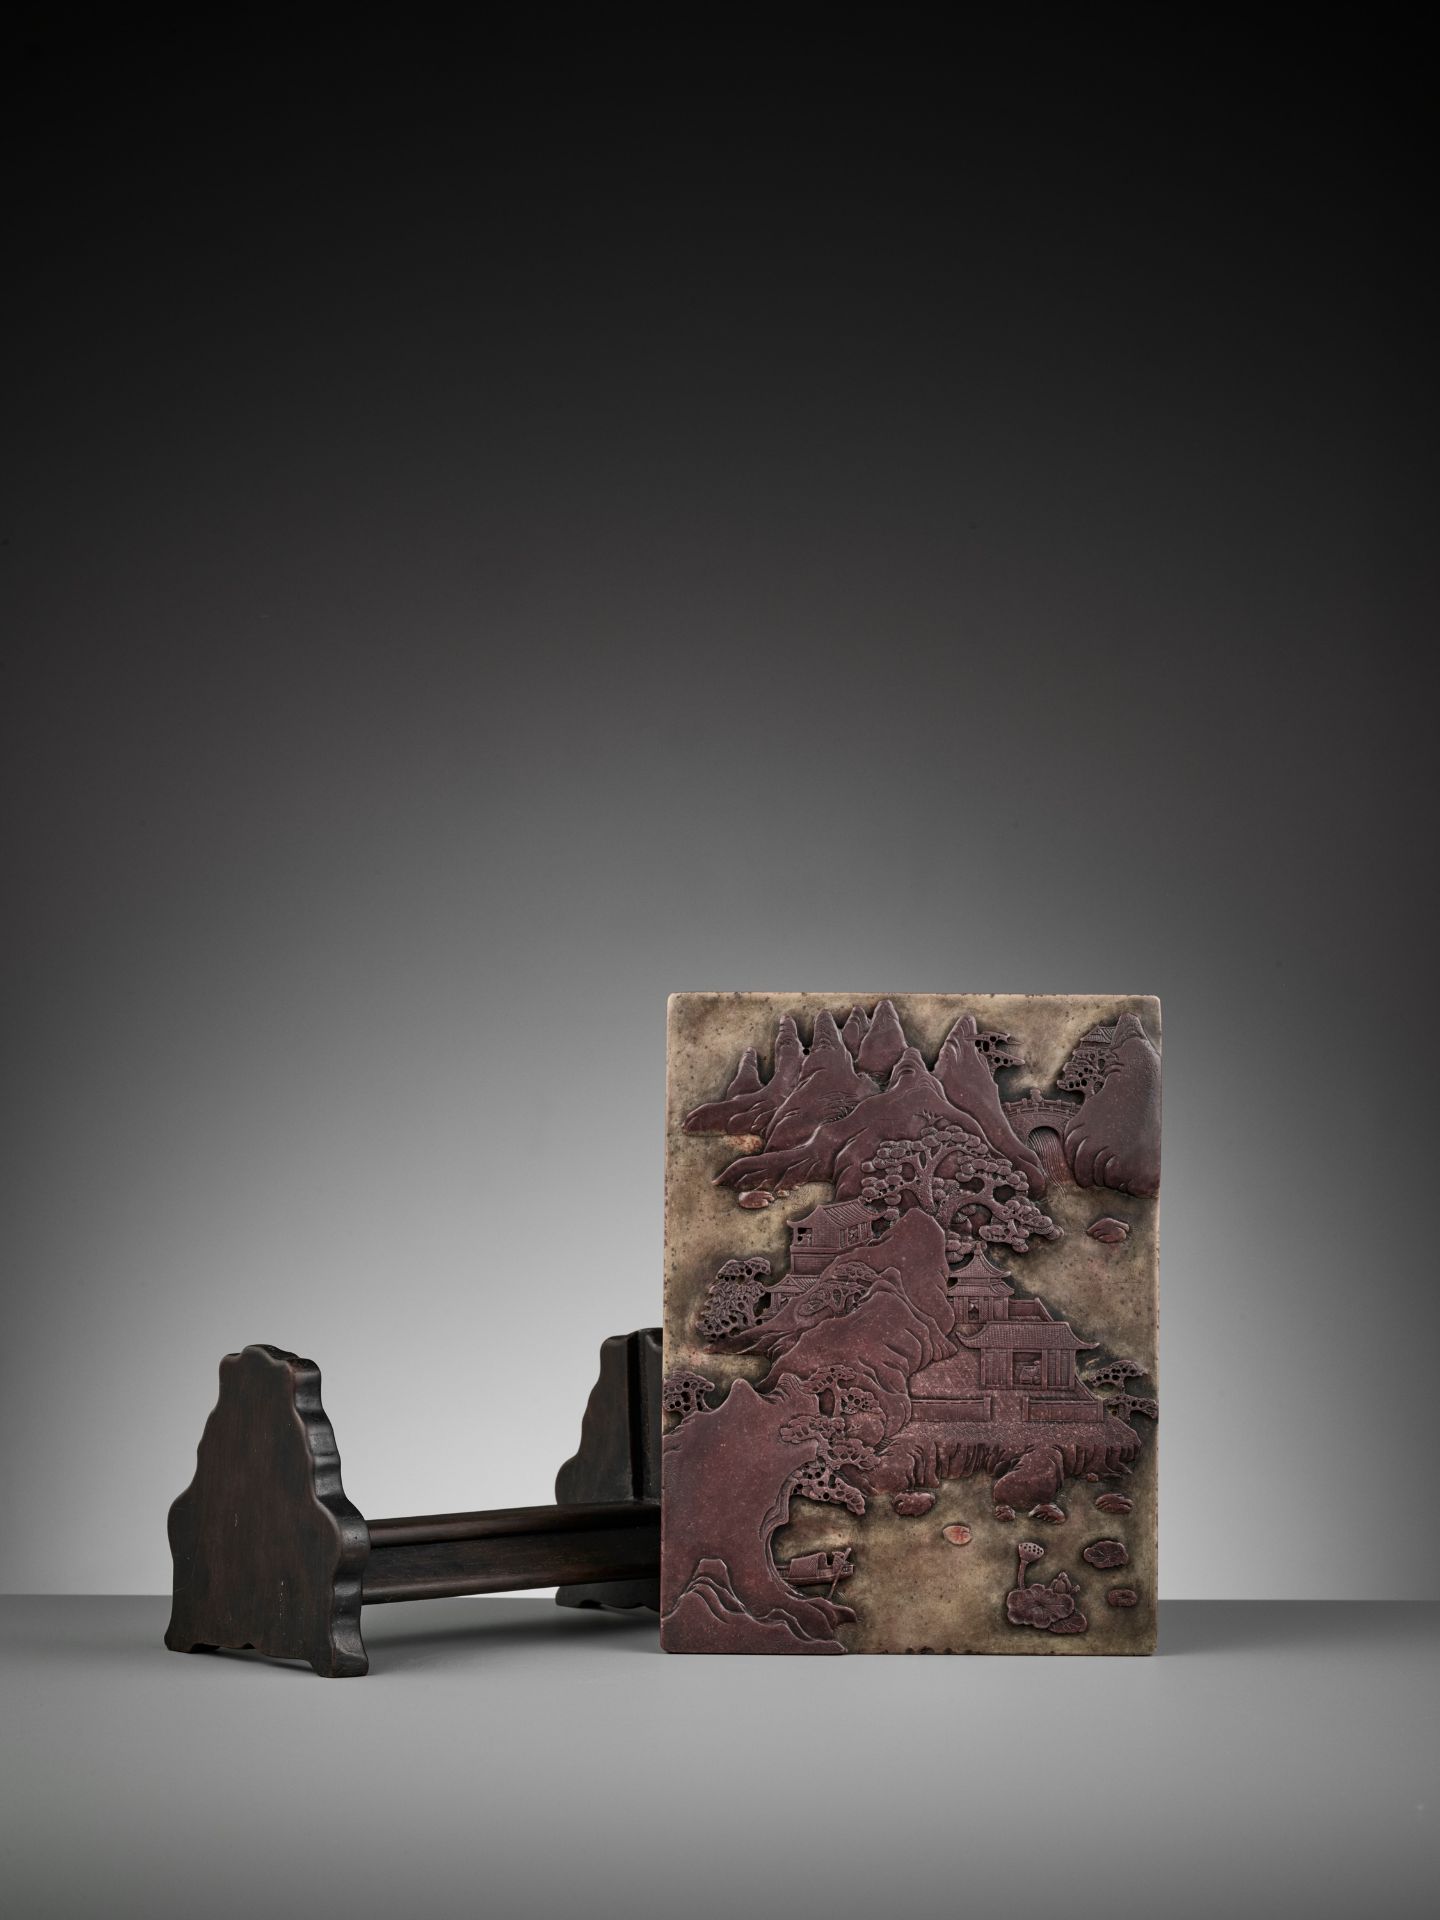 A DUAN STONE 'LANDSCAPE AND POEM' TABLE SCREEN, QING DYNASTY - Image 9 of 9